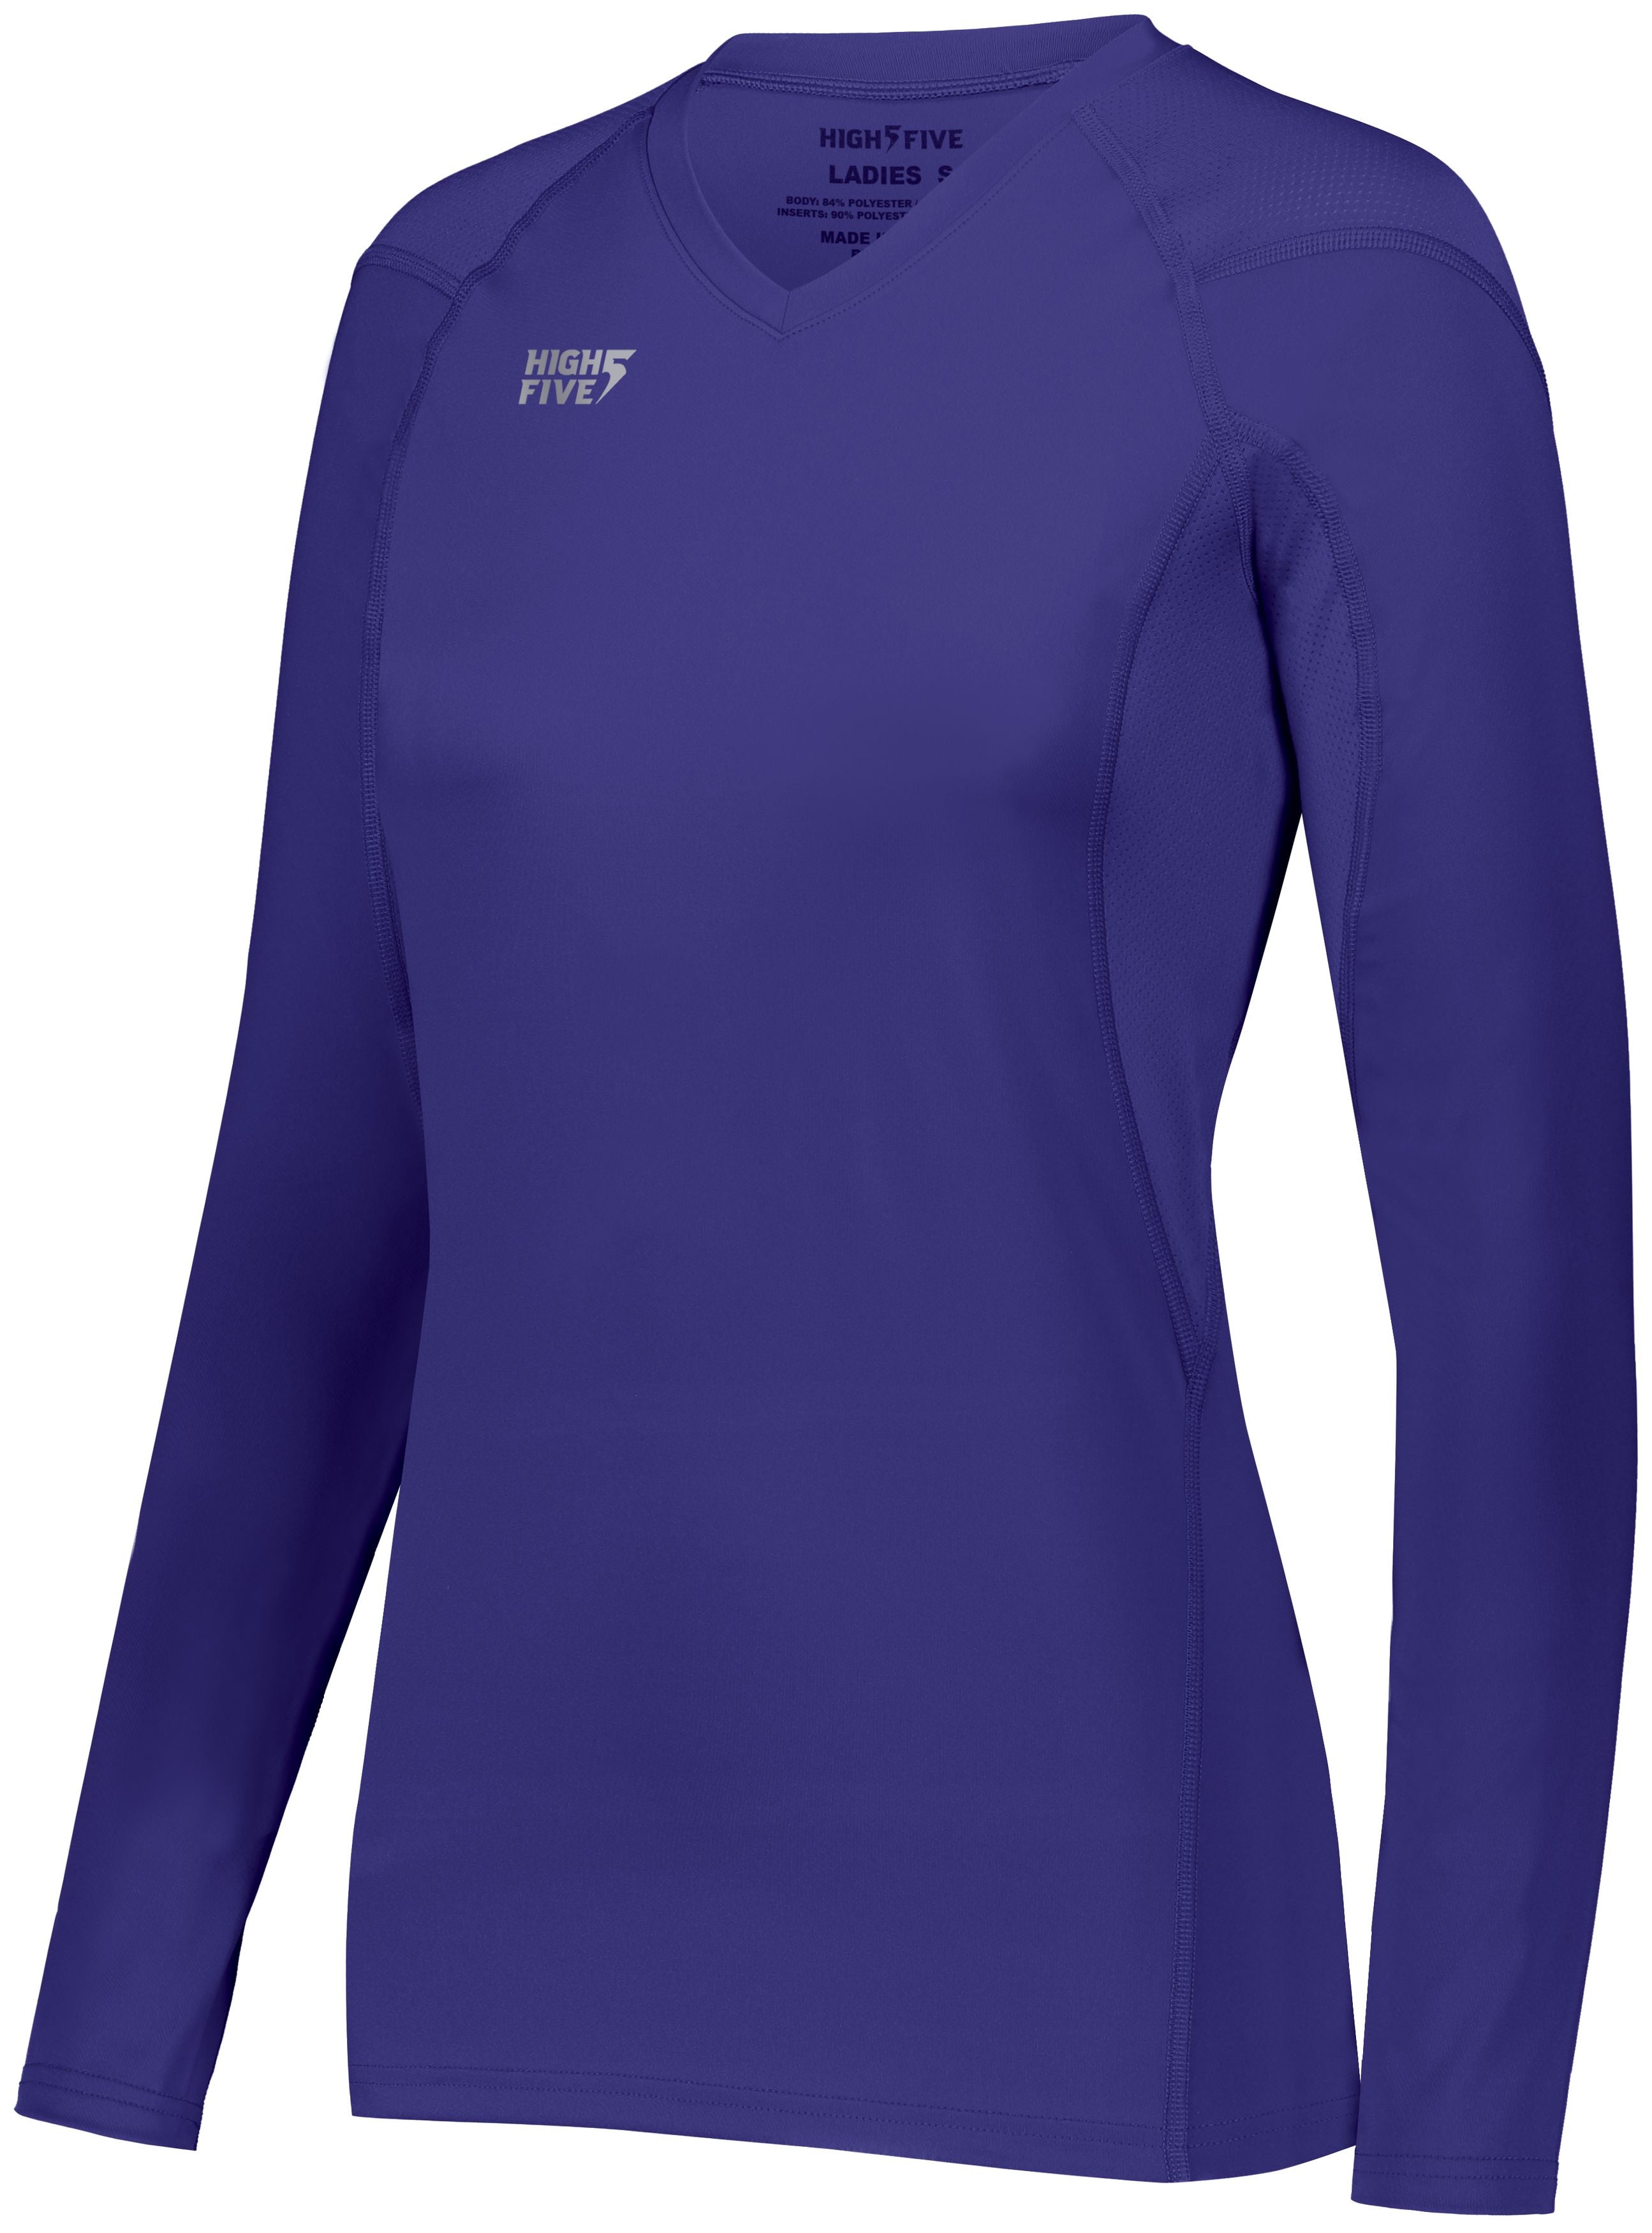 High 5 Girls Truhit Long Sleeve Jersey in Purple (Hlw)  -Part of the Girls, High5-Products, Volleyball, Girls-Jersey, Shirts product lines at KanaleyCreations.com